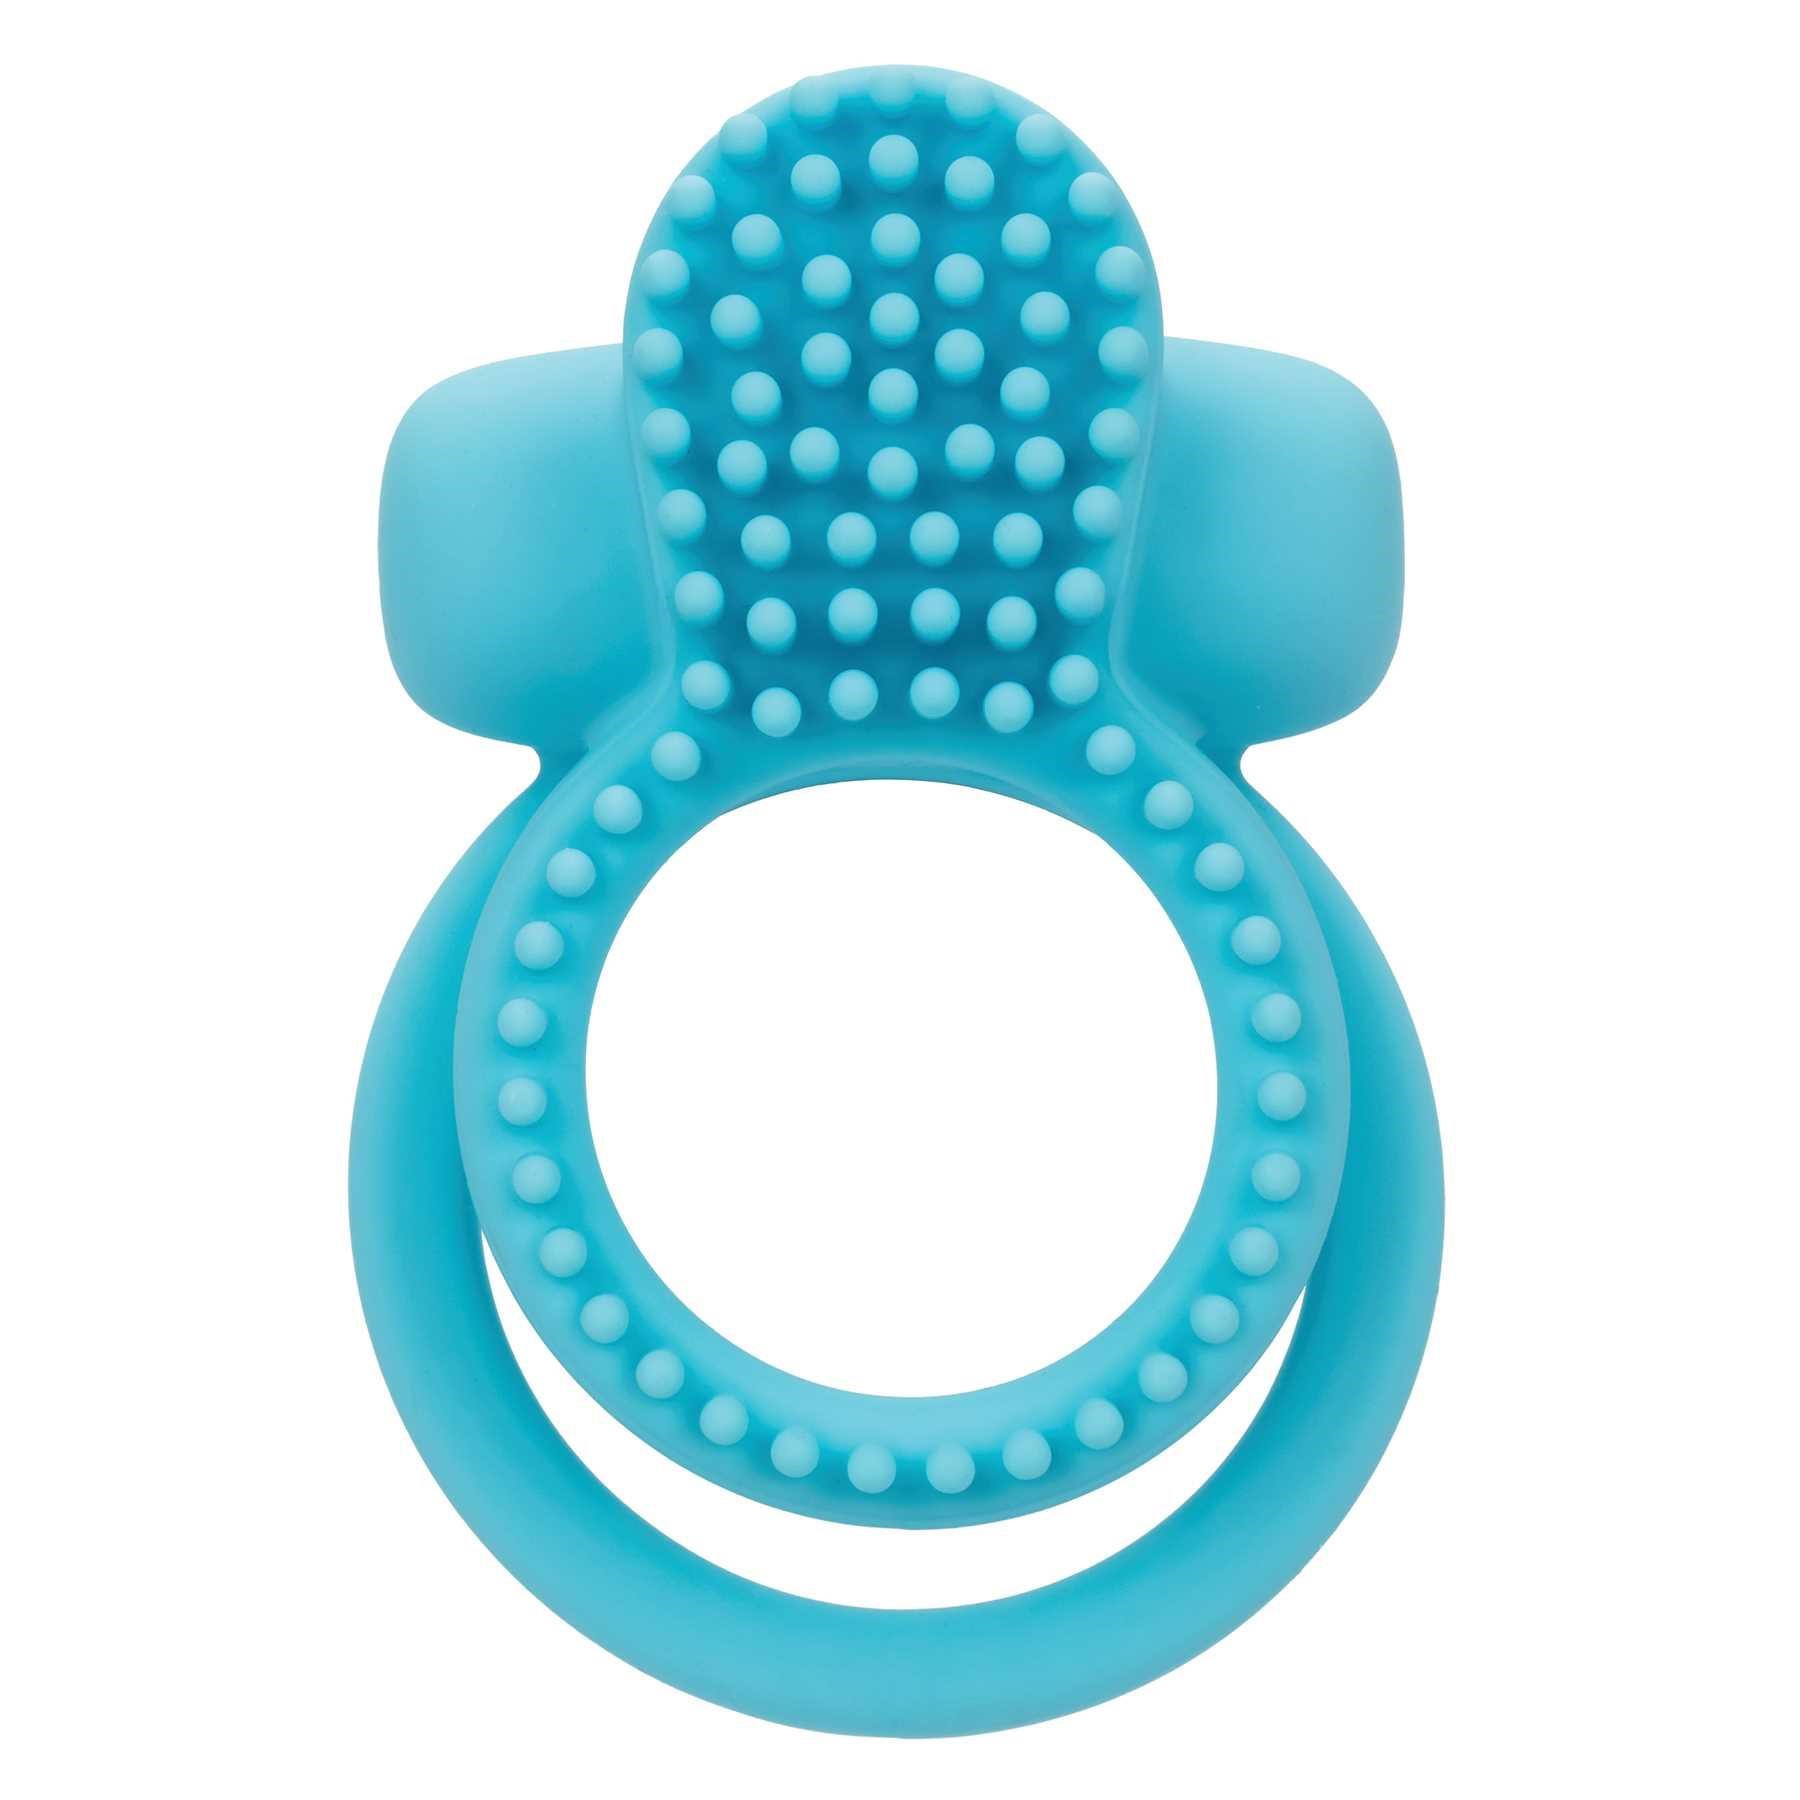 Adam & Eve Silicone Couples Enhancer Ring product image 2